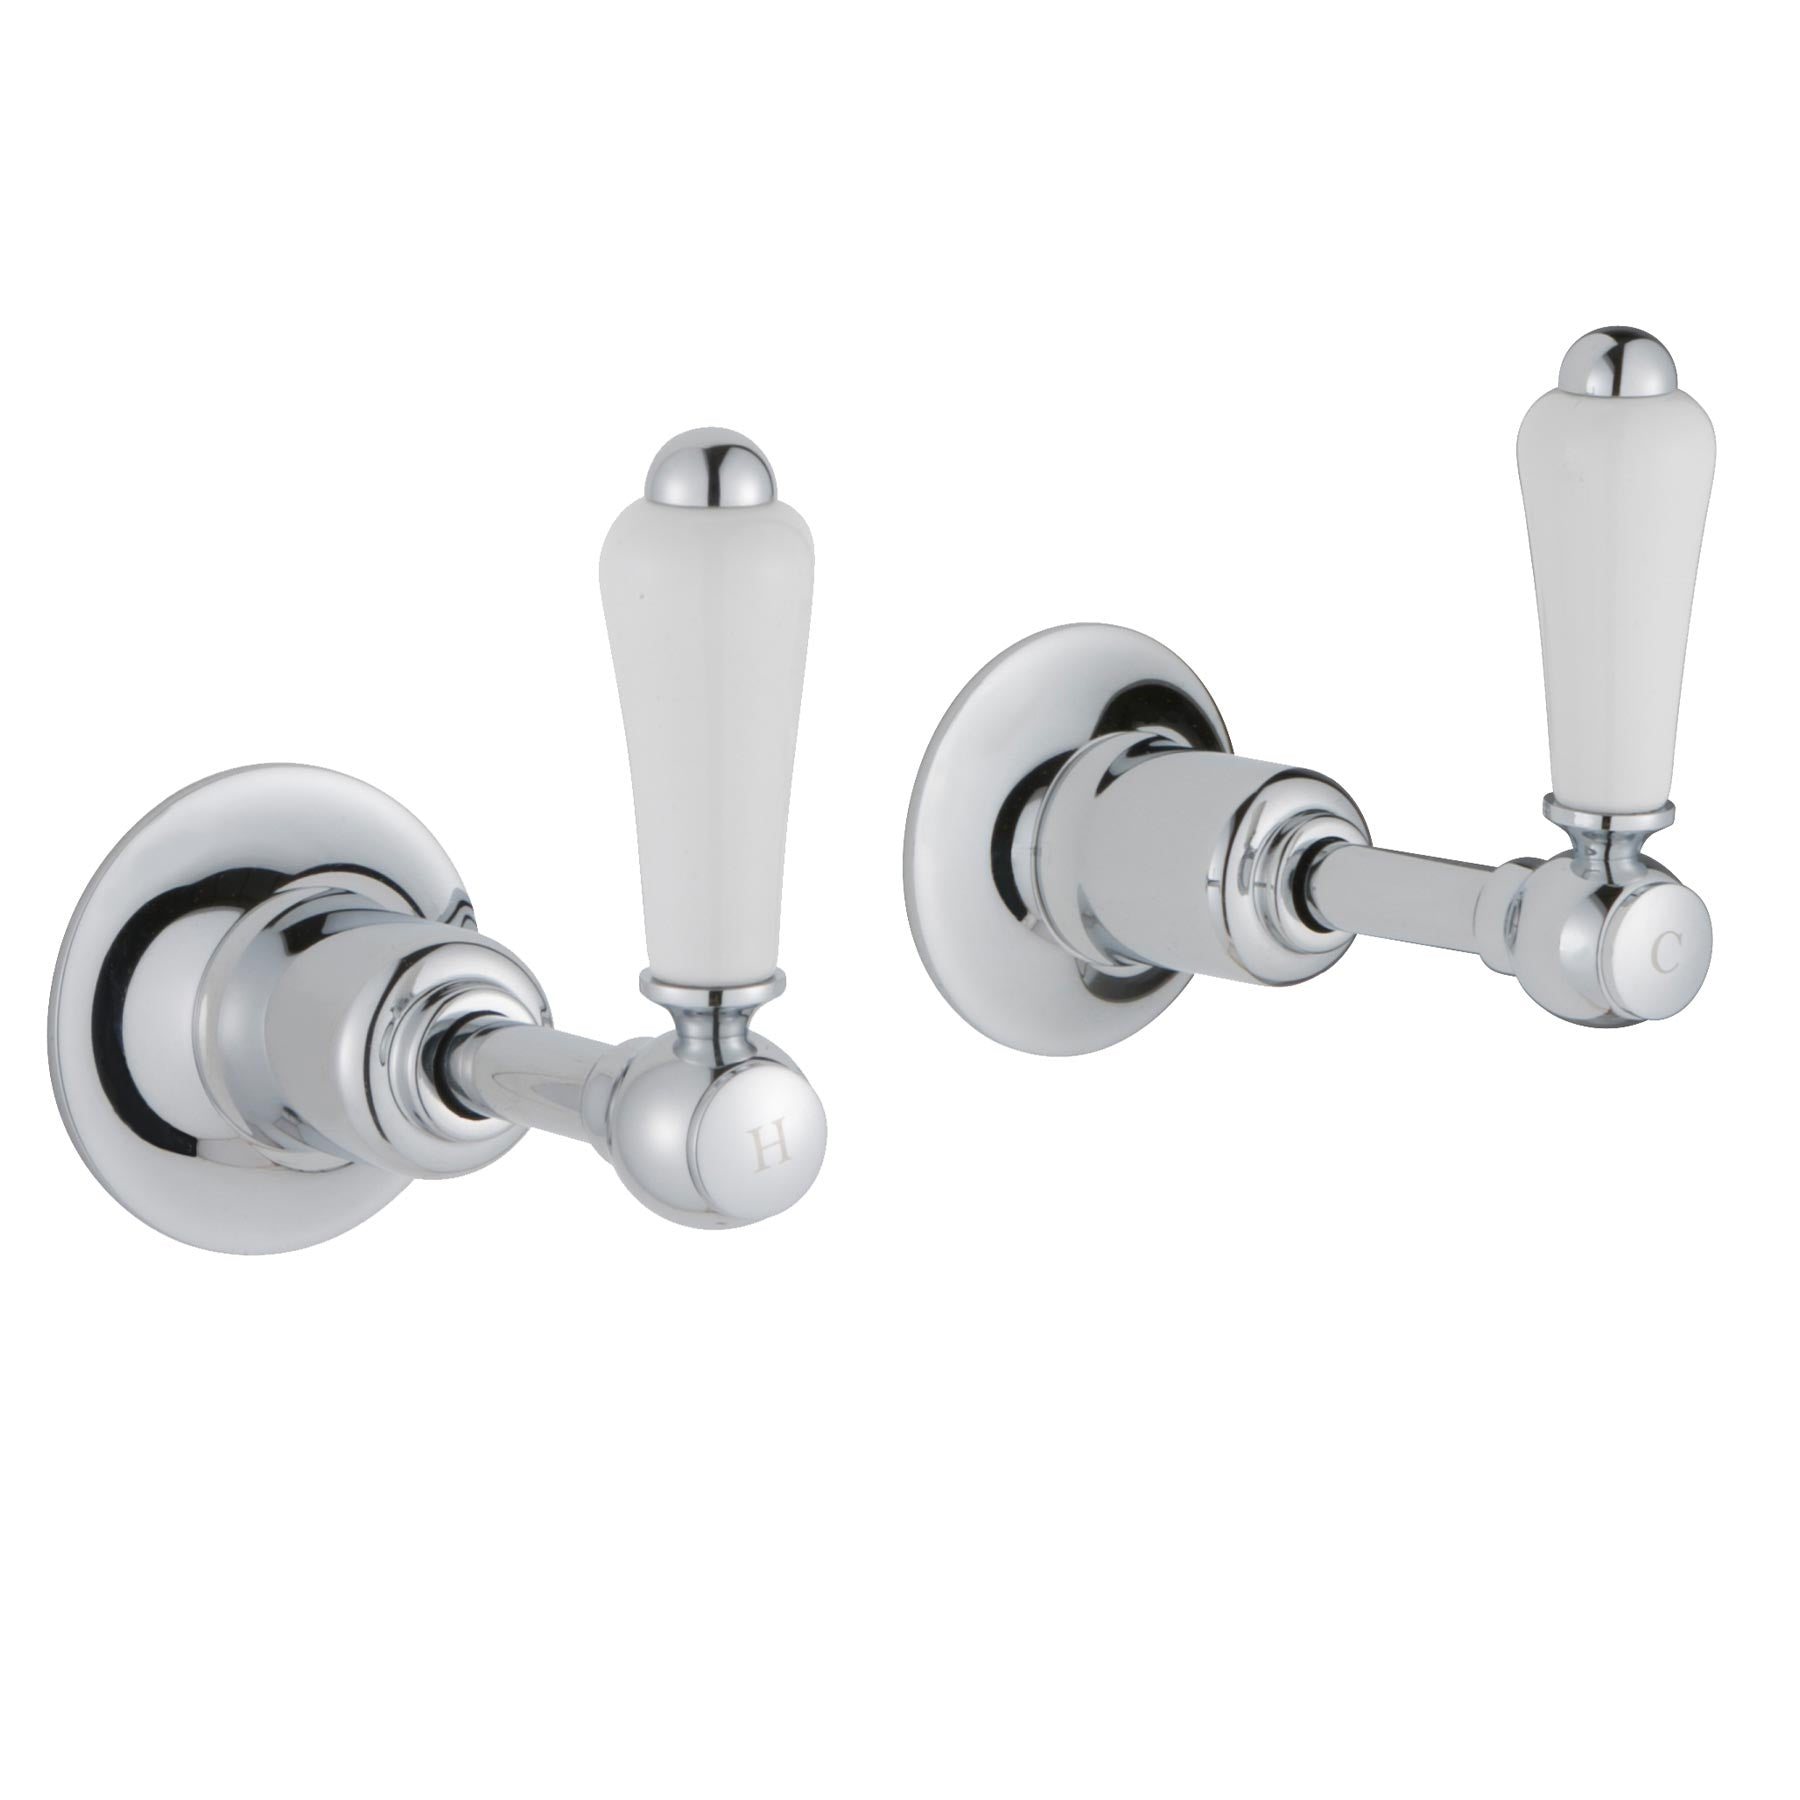 Chester Lever Wall Mounted Valves 1/2, LP 0.2- Chrome [85089]